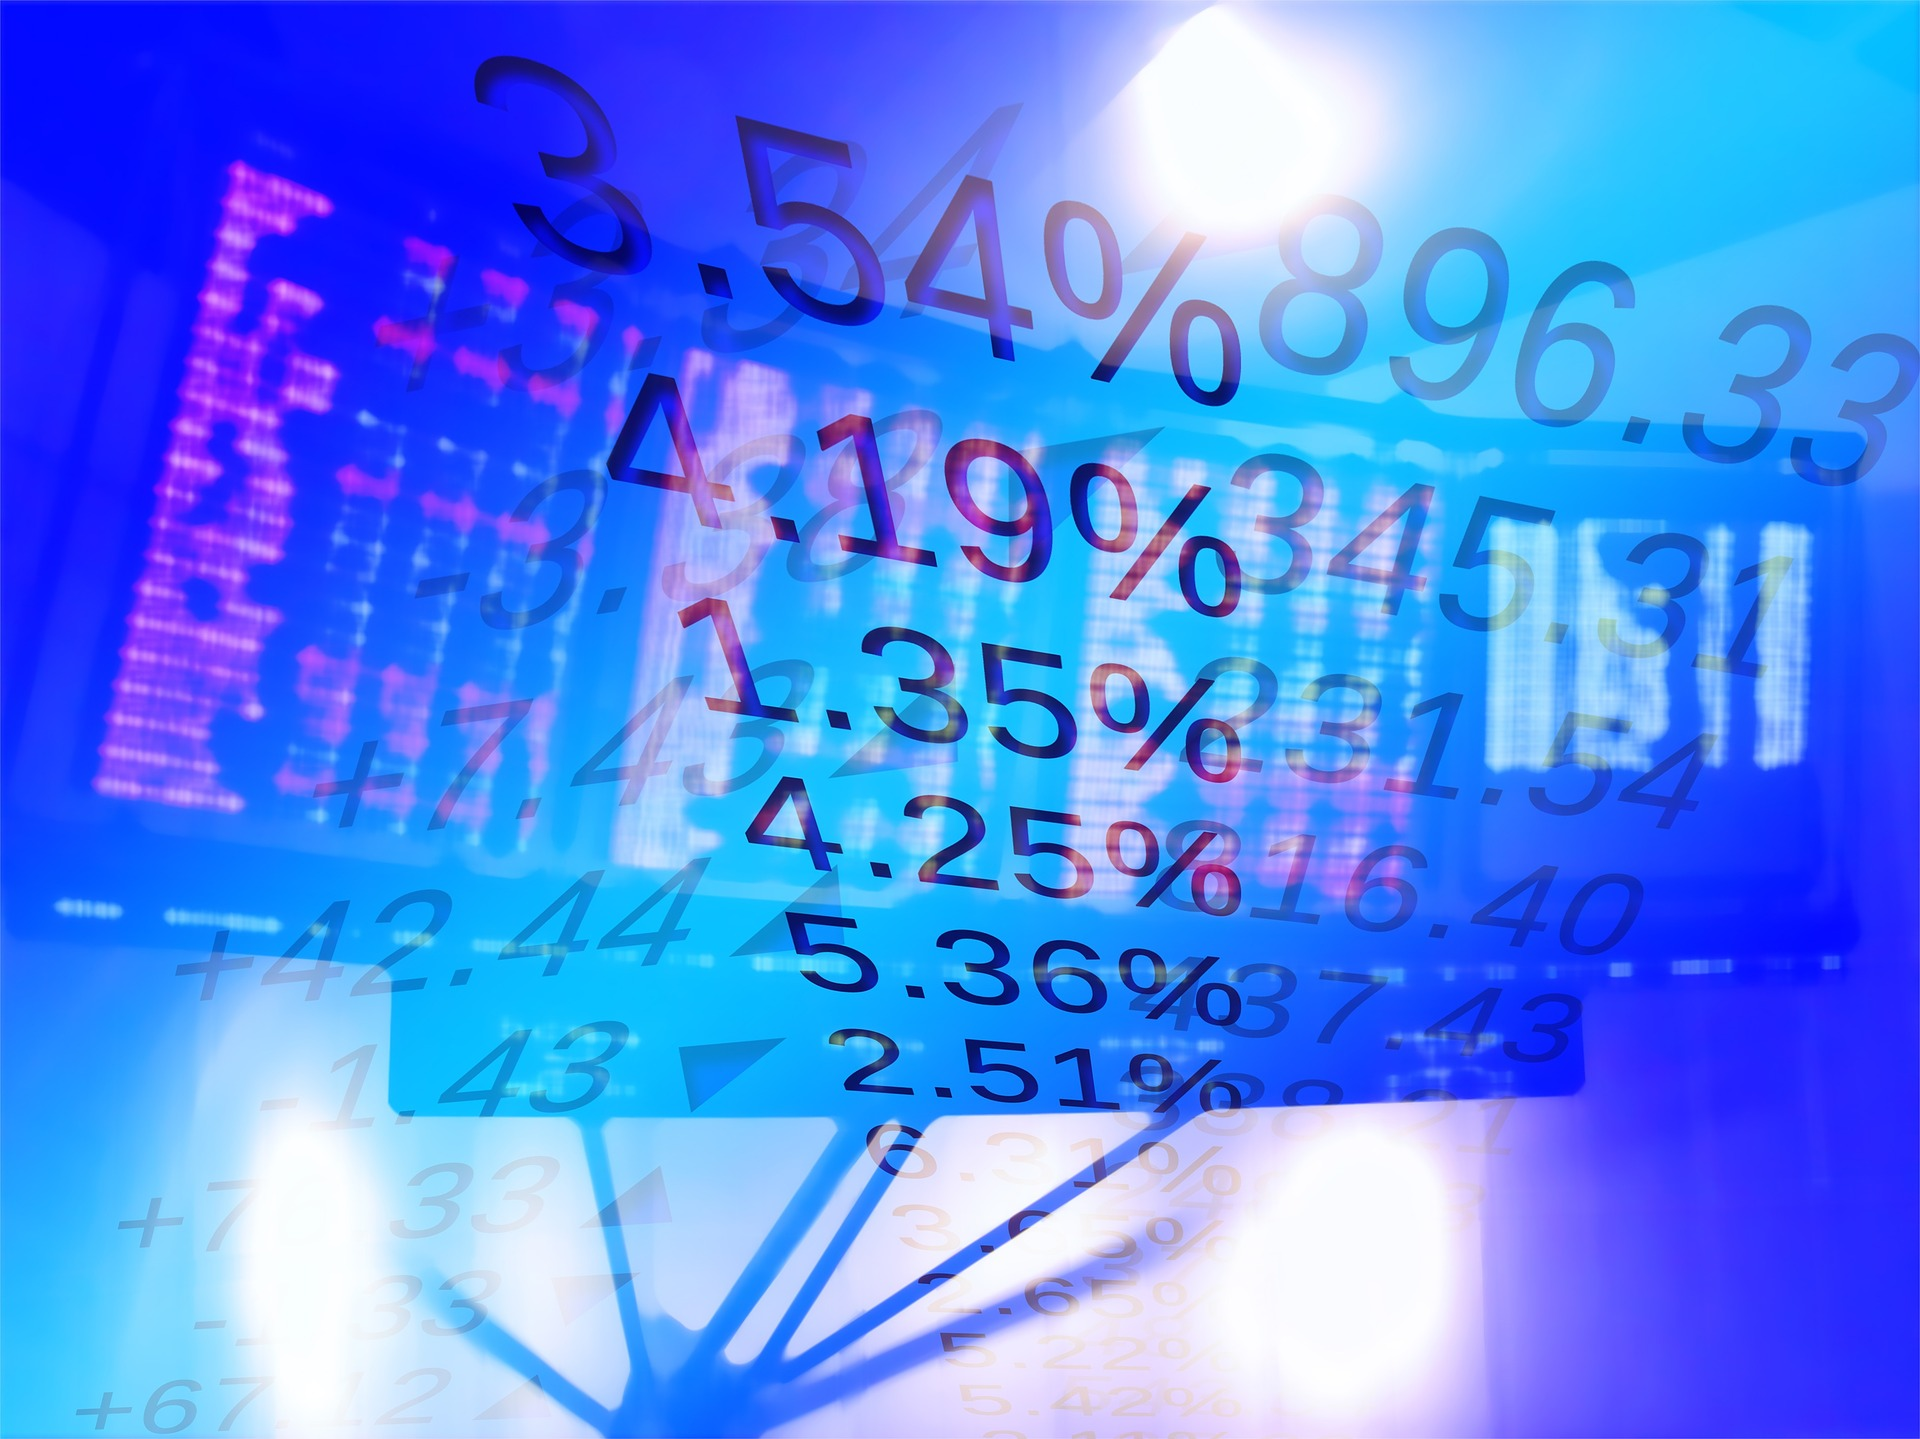 Blue screen with various numbers and percentages over a stock market ticker screen.